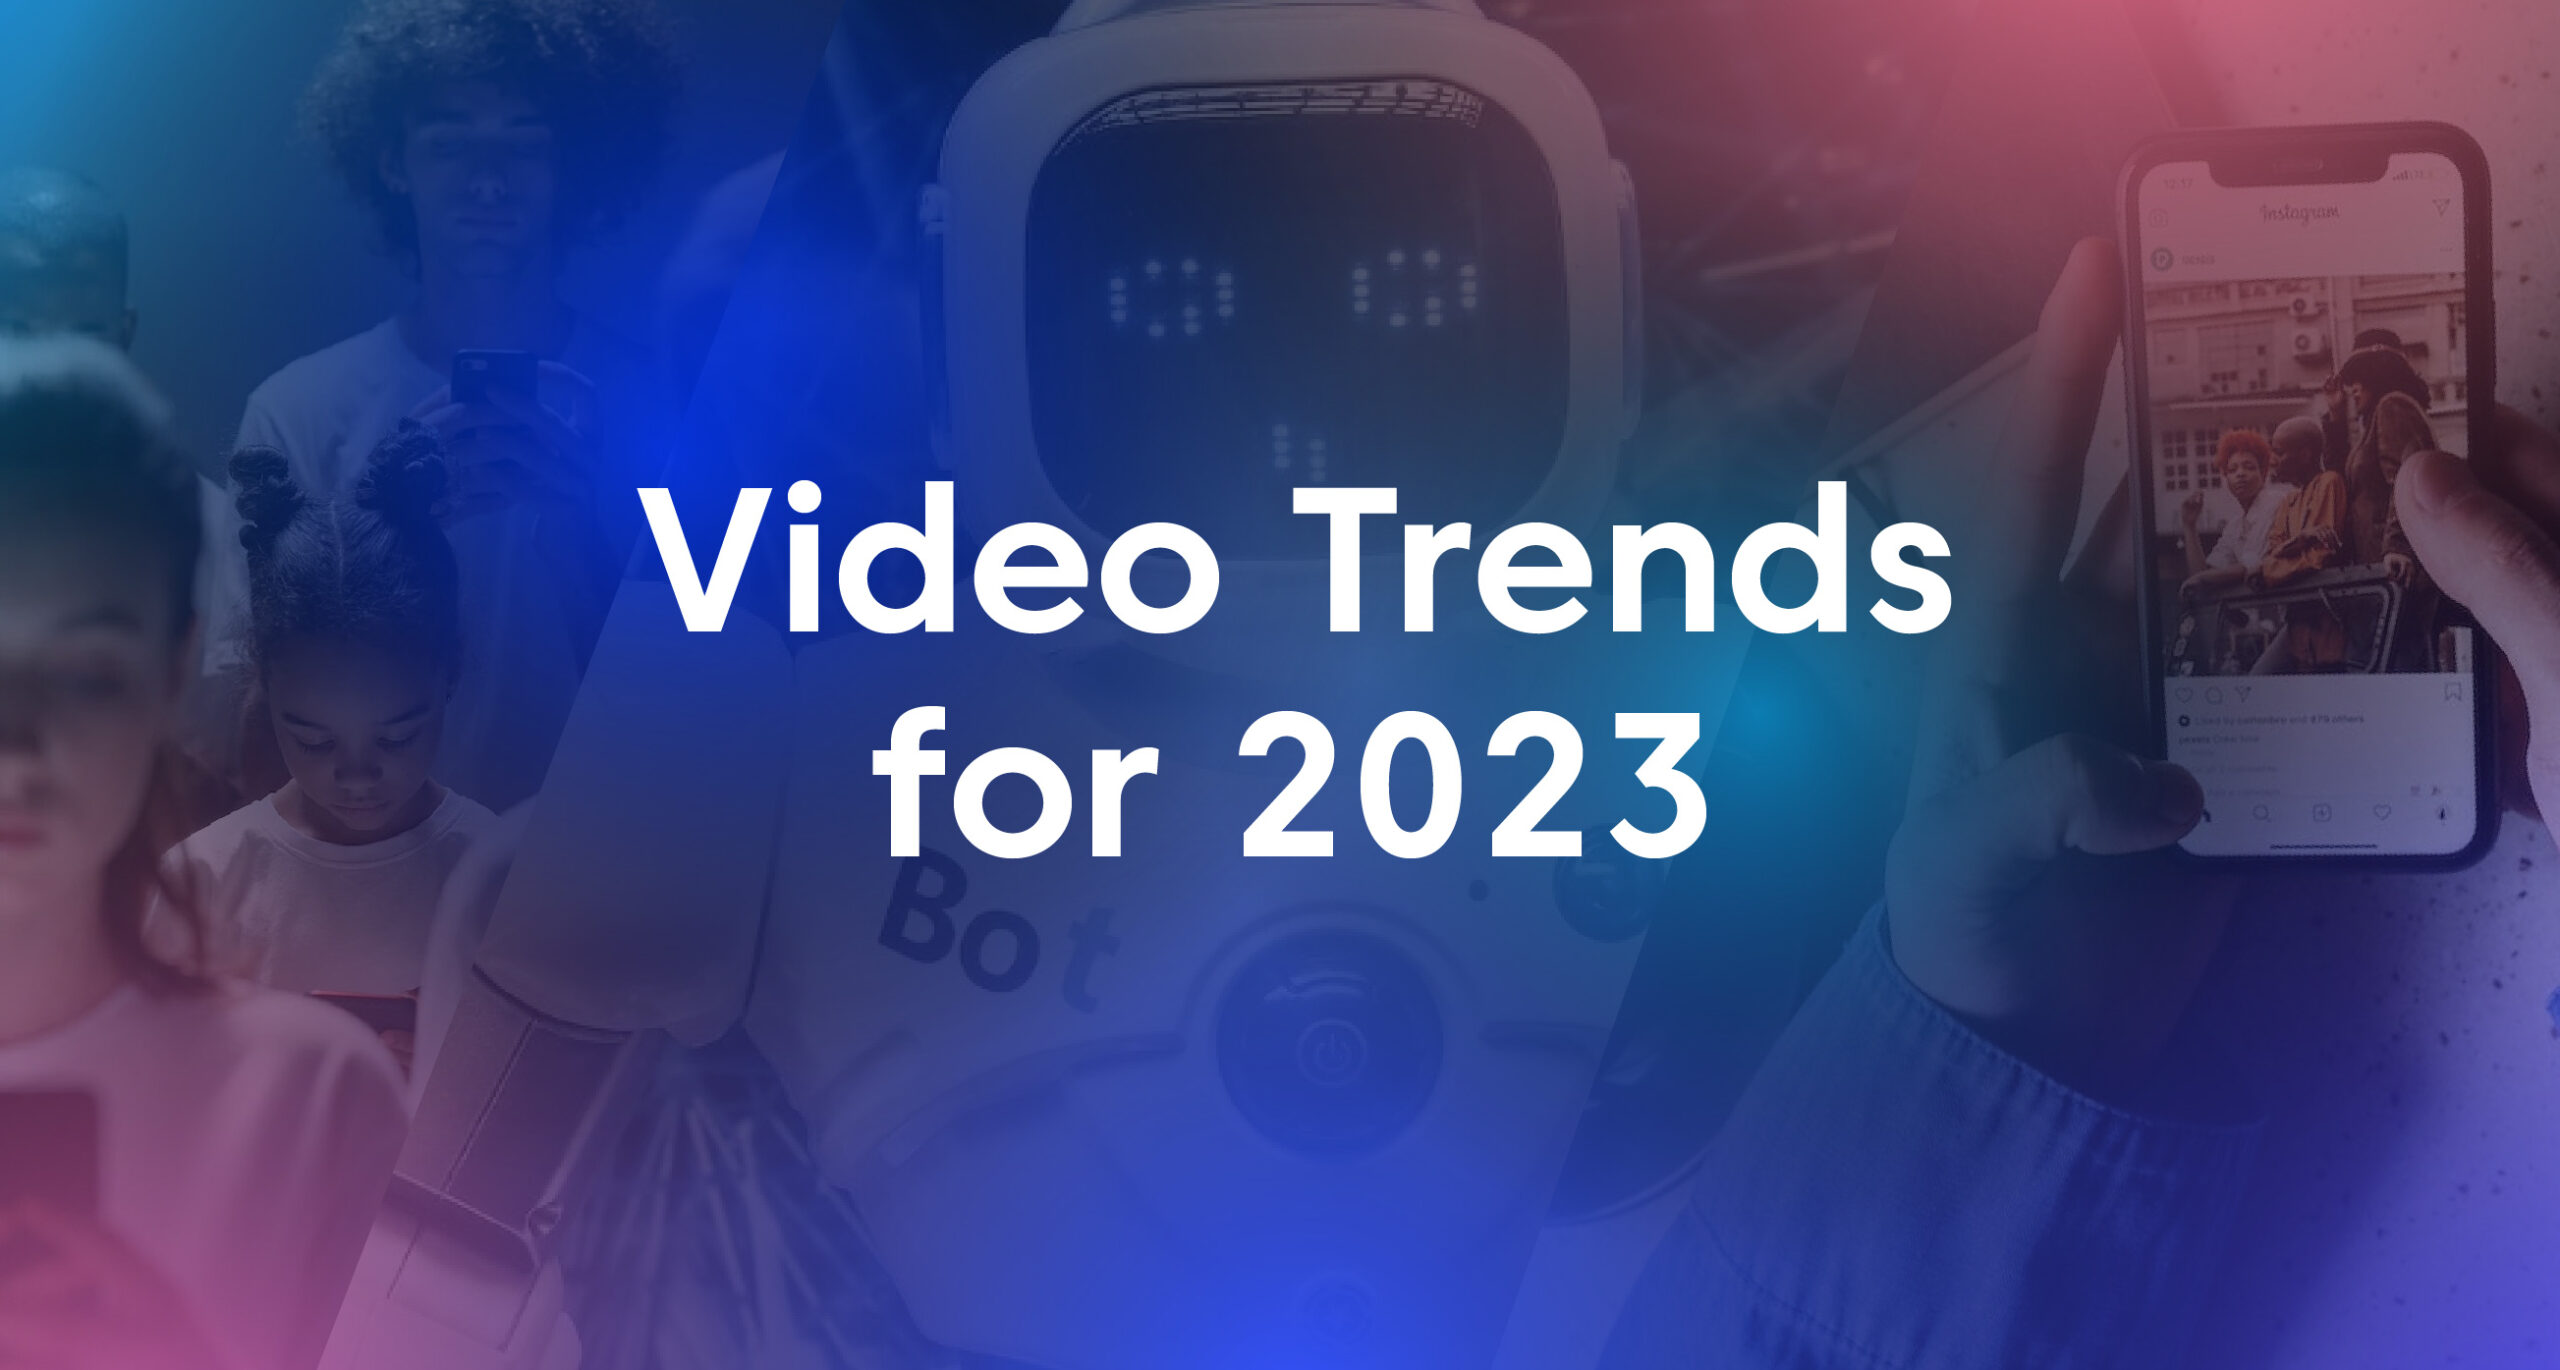 Video Trends for 2023